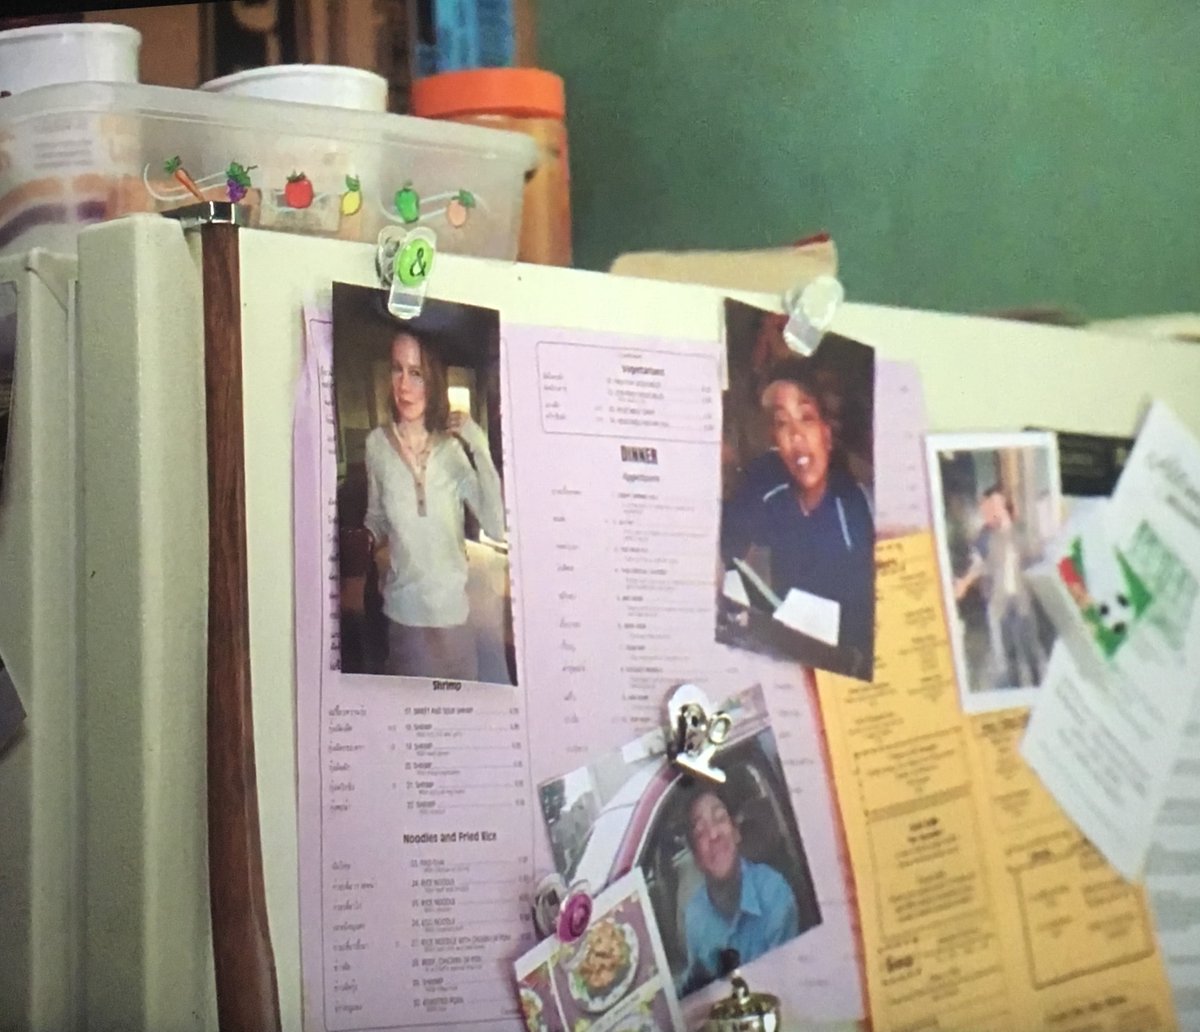 Lester cautions McNulty that a job will not save you and a good case ends. Then… pan across to BEADIE!!! Her picture on the fridge! Oh please make this happen.